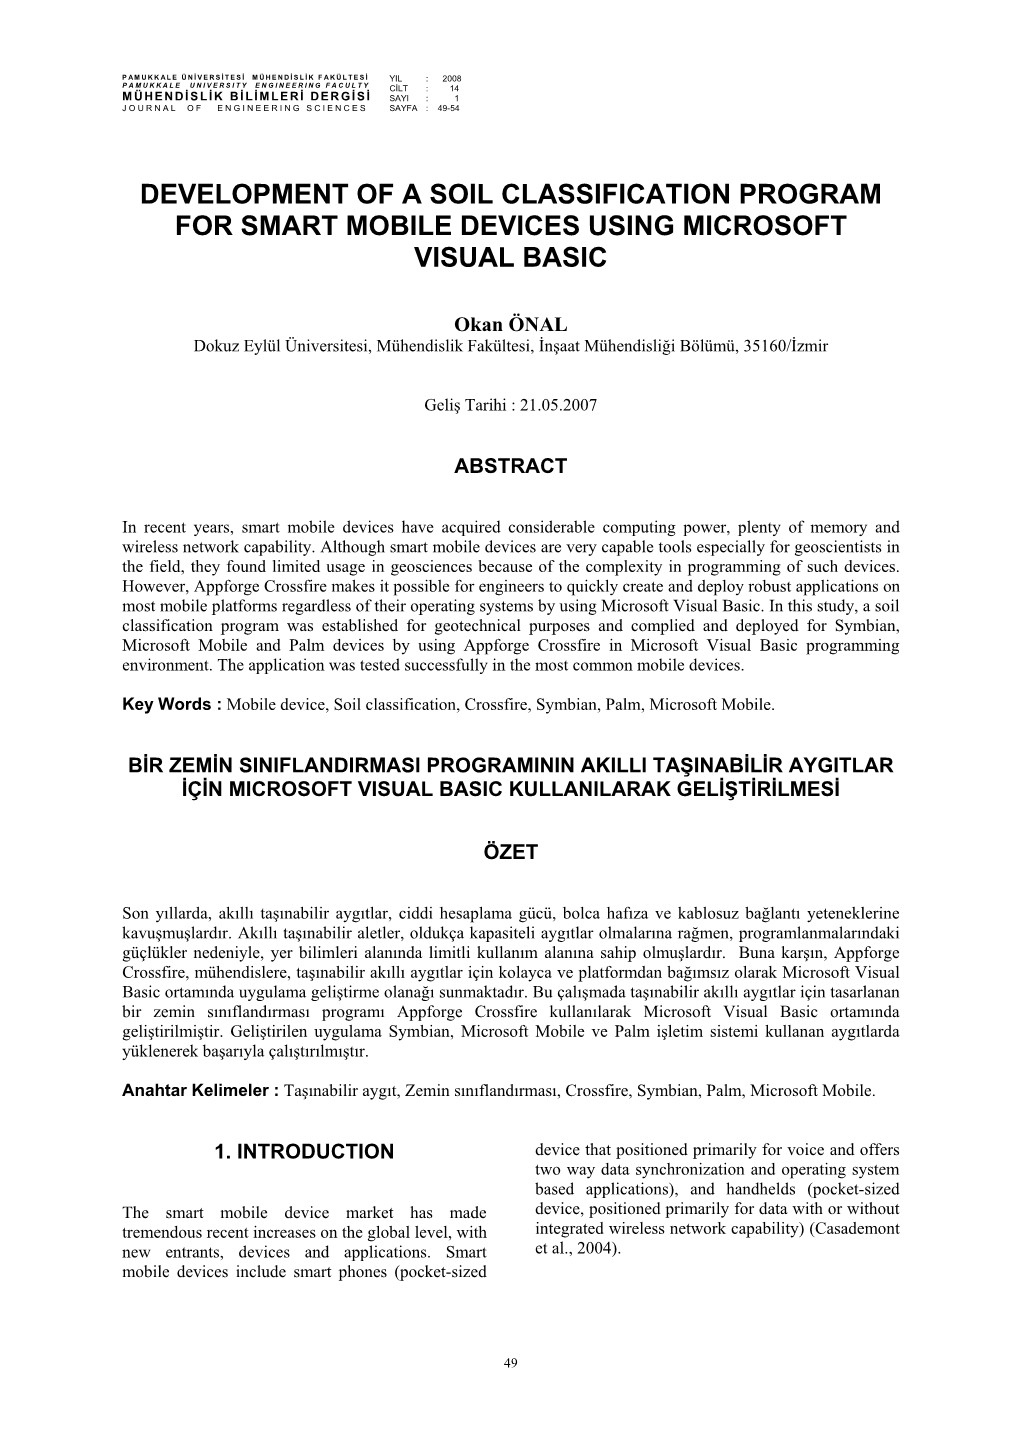 Development of a Soil Classification Program for Smart Mobile Devices Using Microsoft Visual Basic